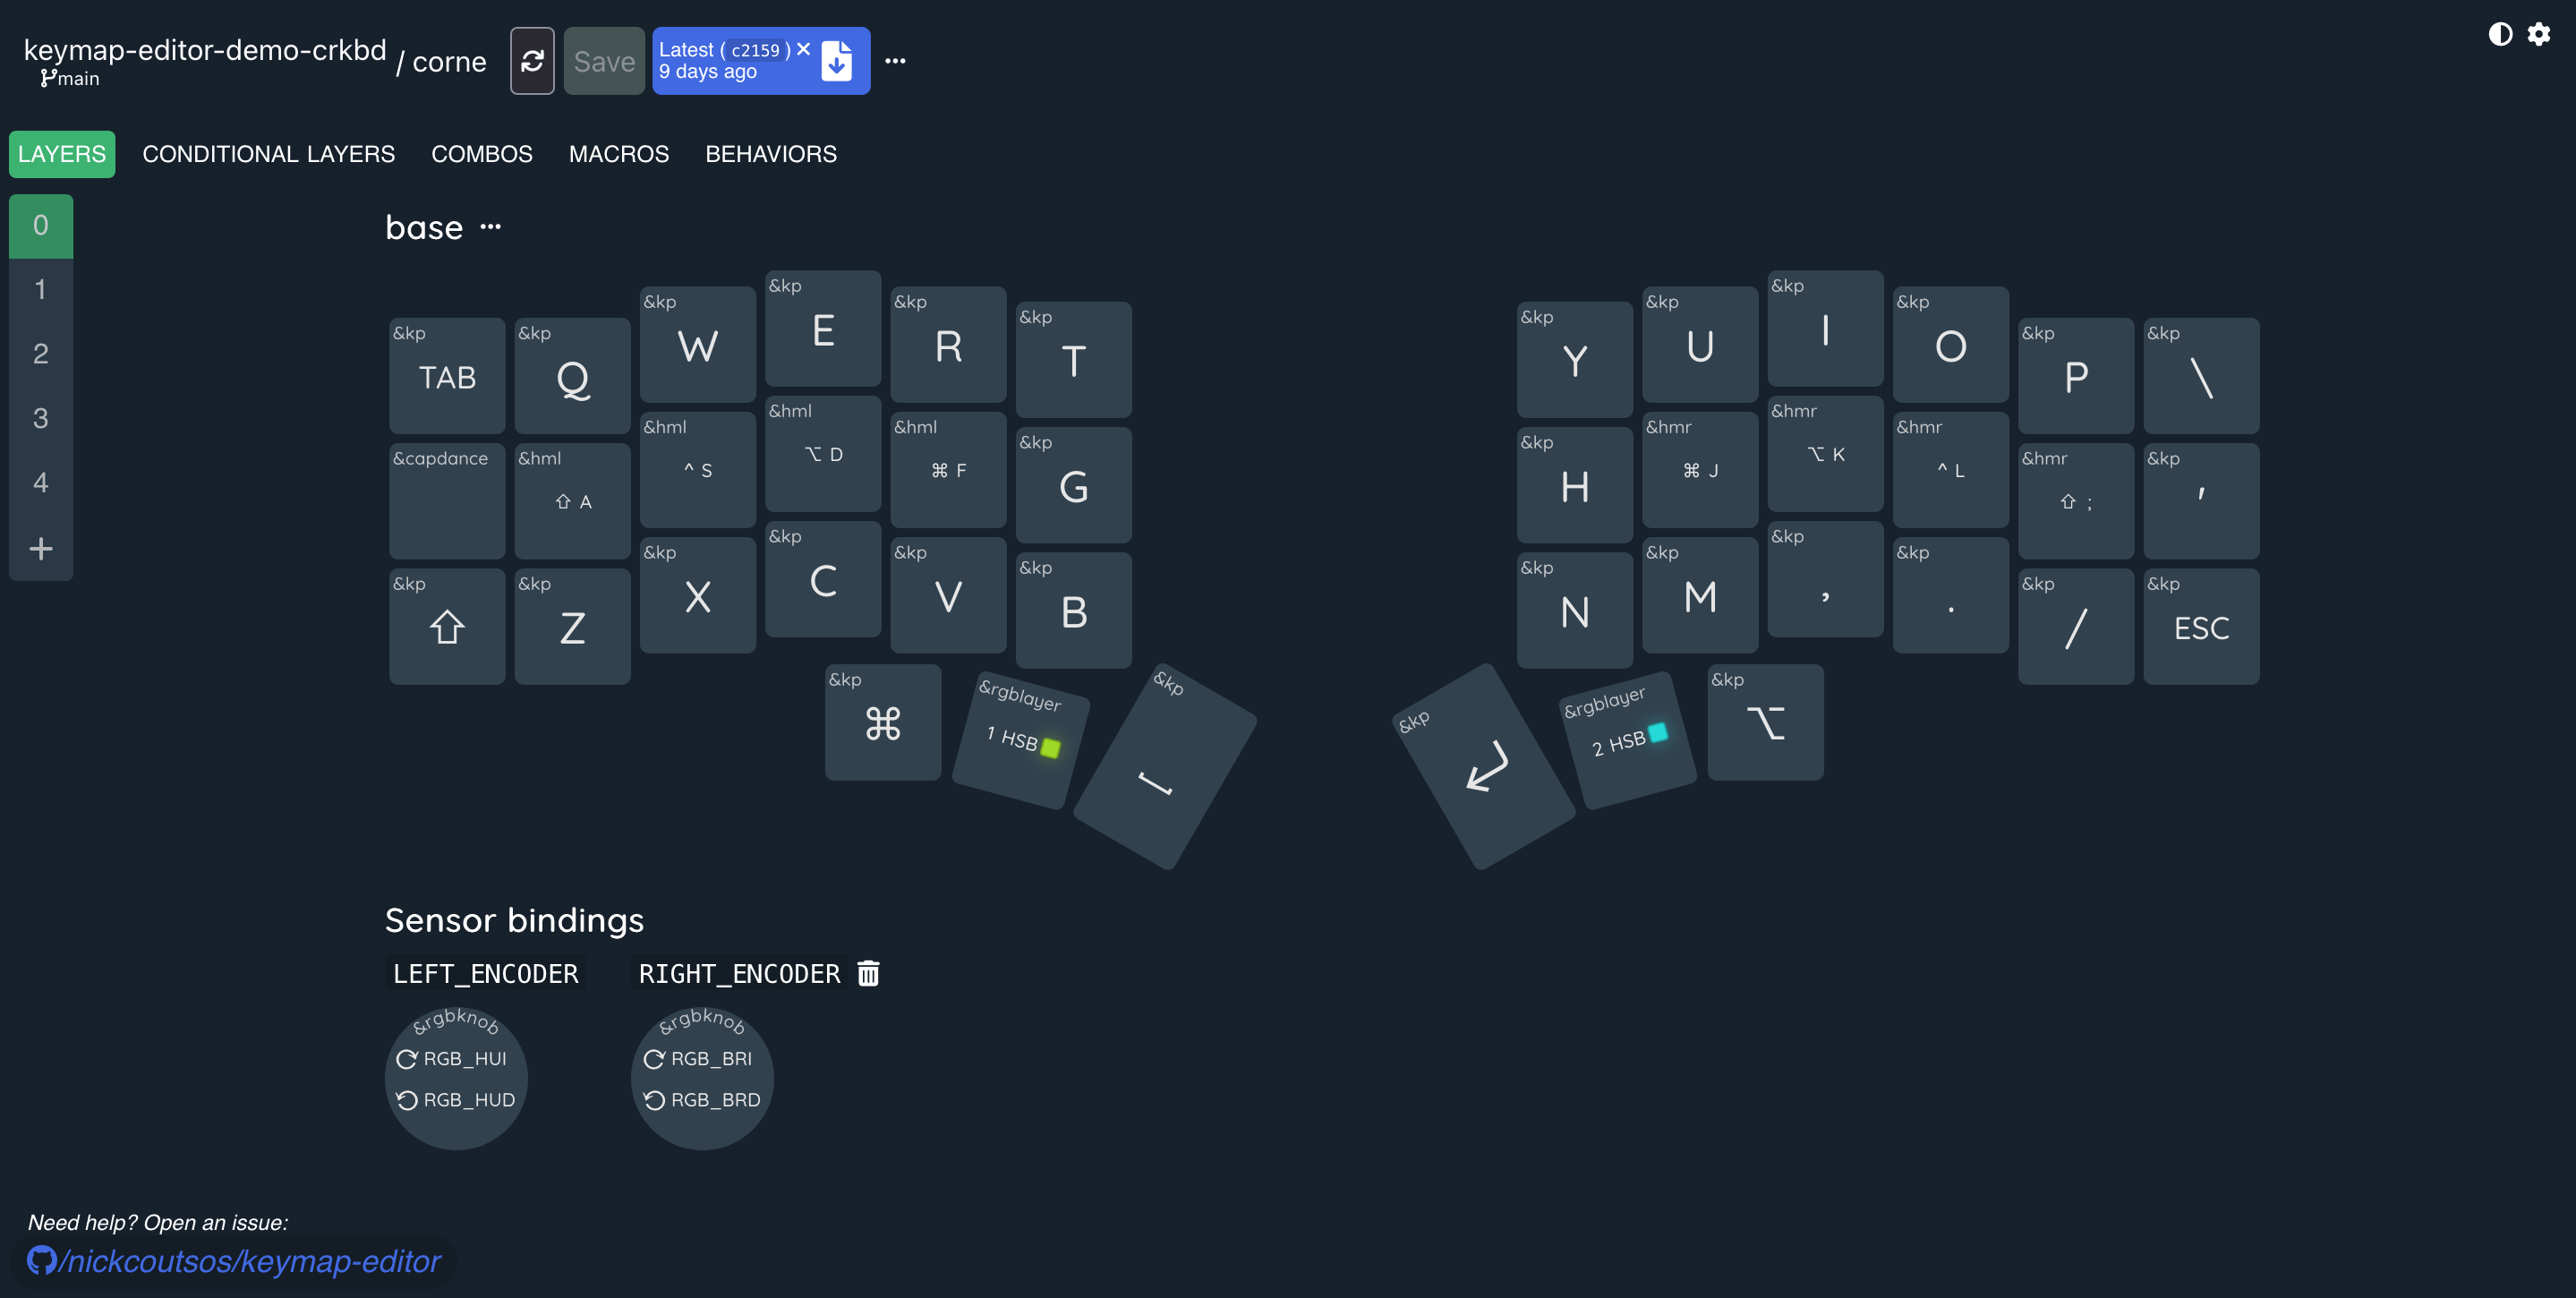 Shows a screenshot of the Keymap Editor application featuring a graphical layout of the Corne Keyboard with a keymap loaded from the nickcoutsos/keymap-editor-demo-crkbd GitHub repository.